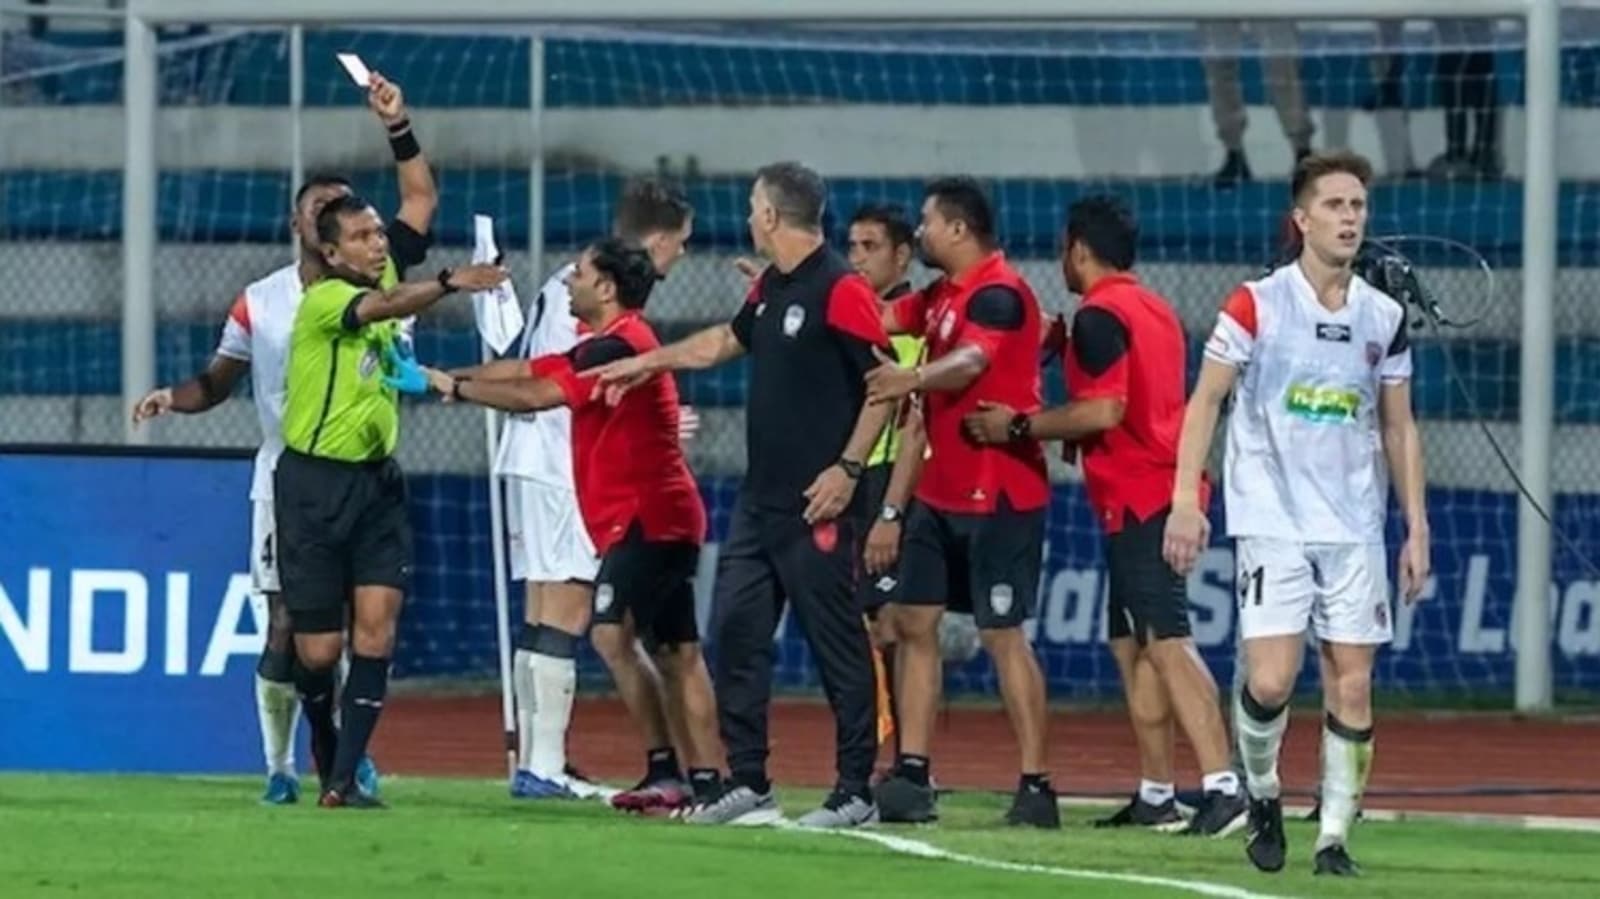 ISL: Fans shout ‘robbed’ after controversial decision overshadows Bengaluru FC’s win over NorthEast United